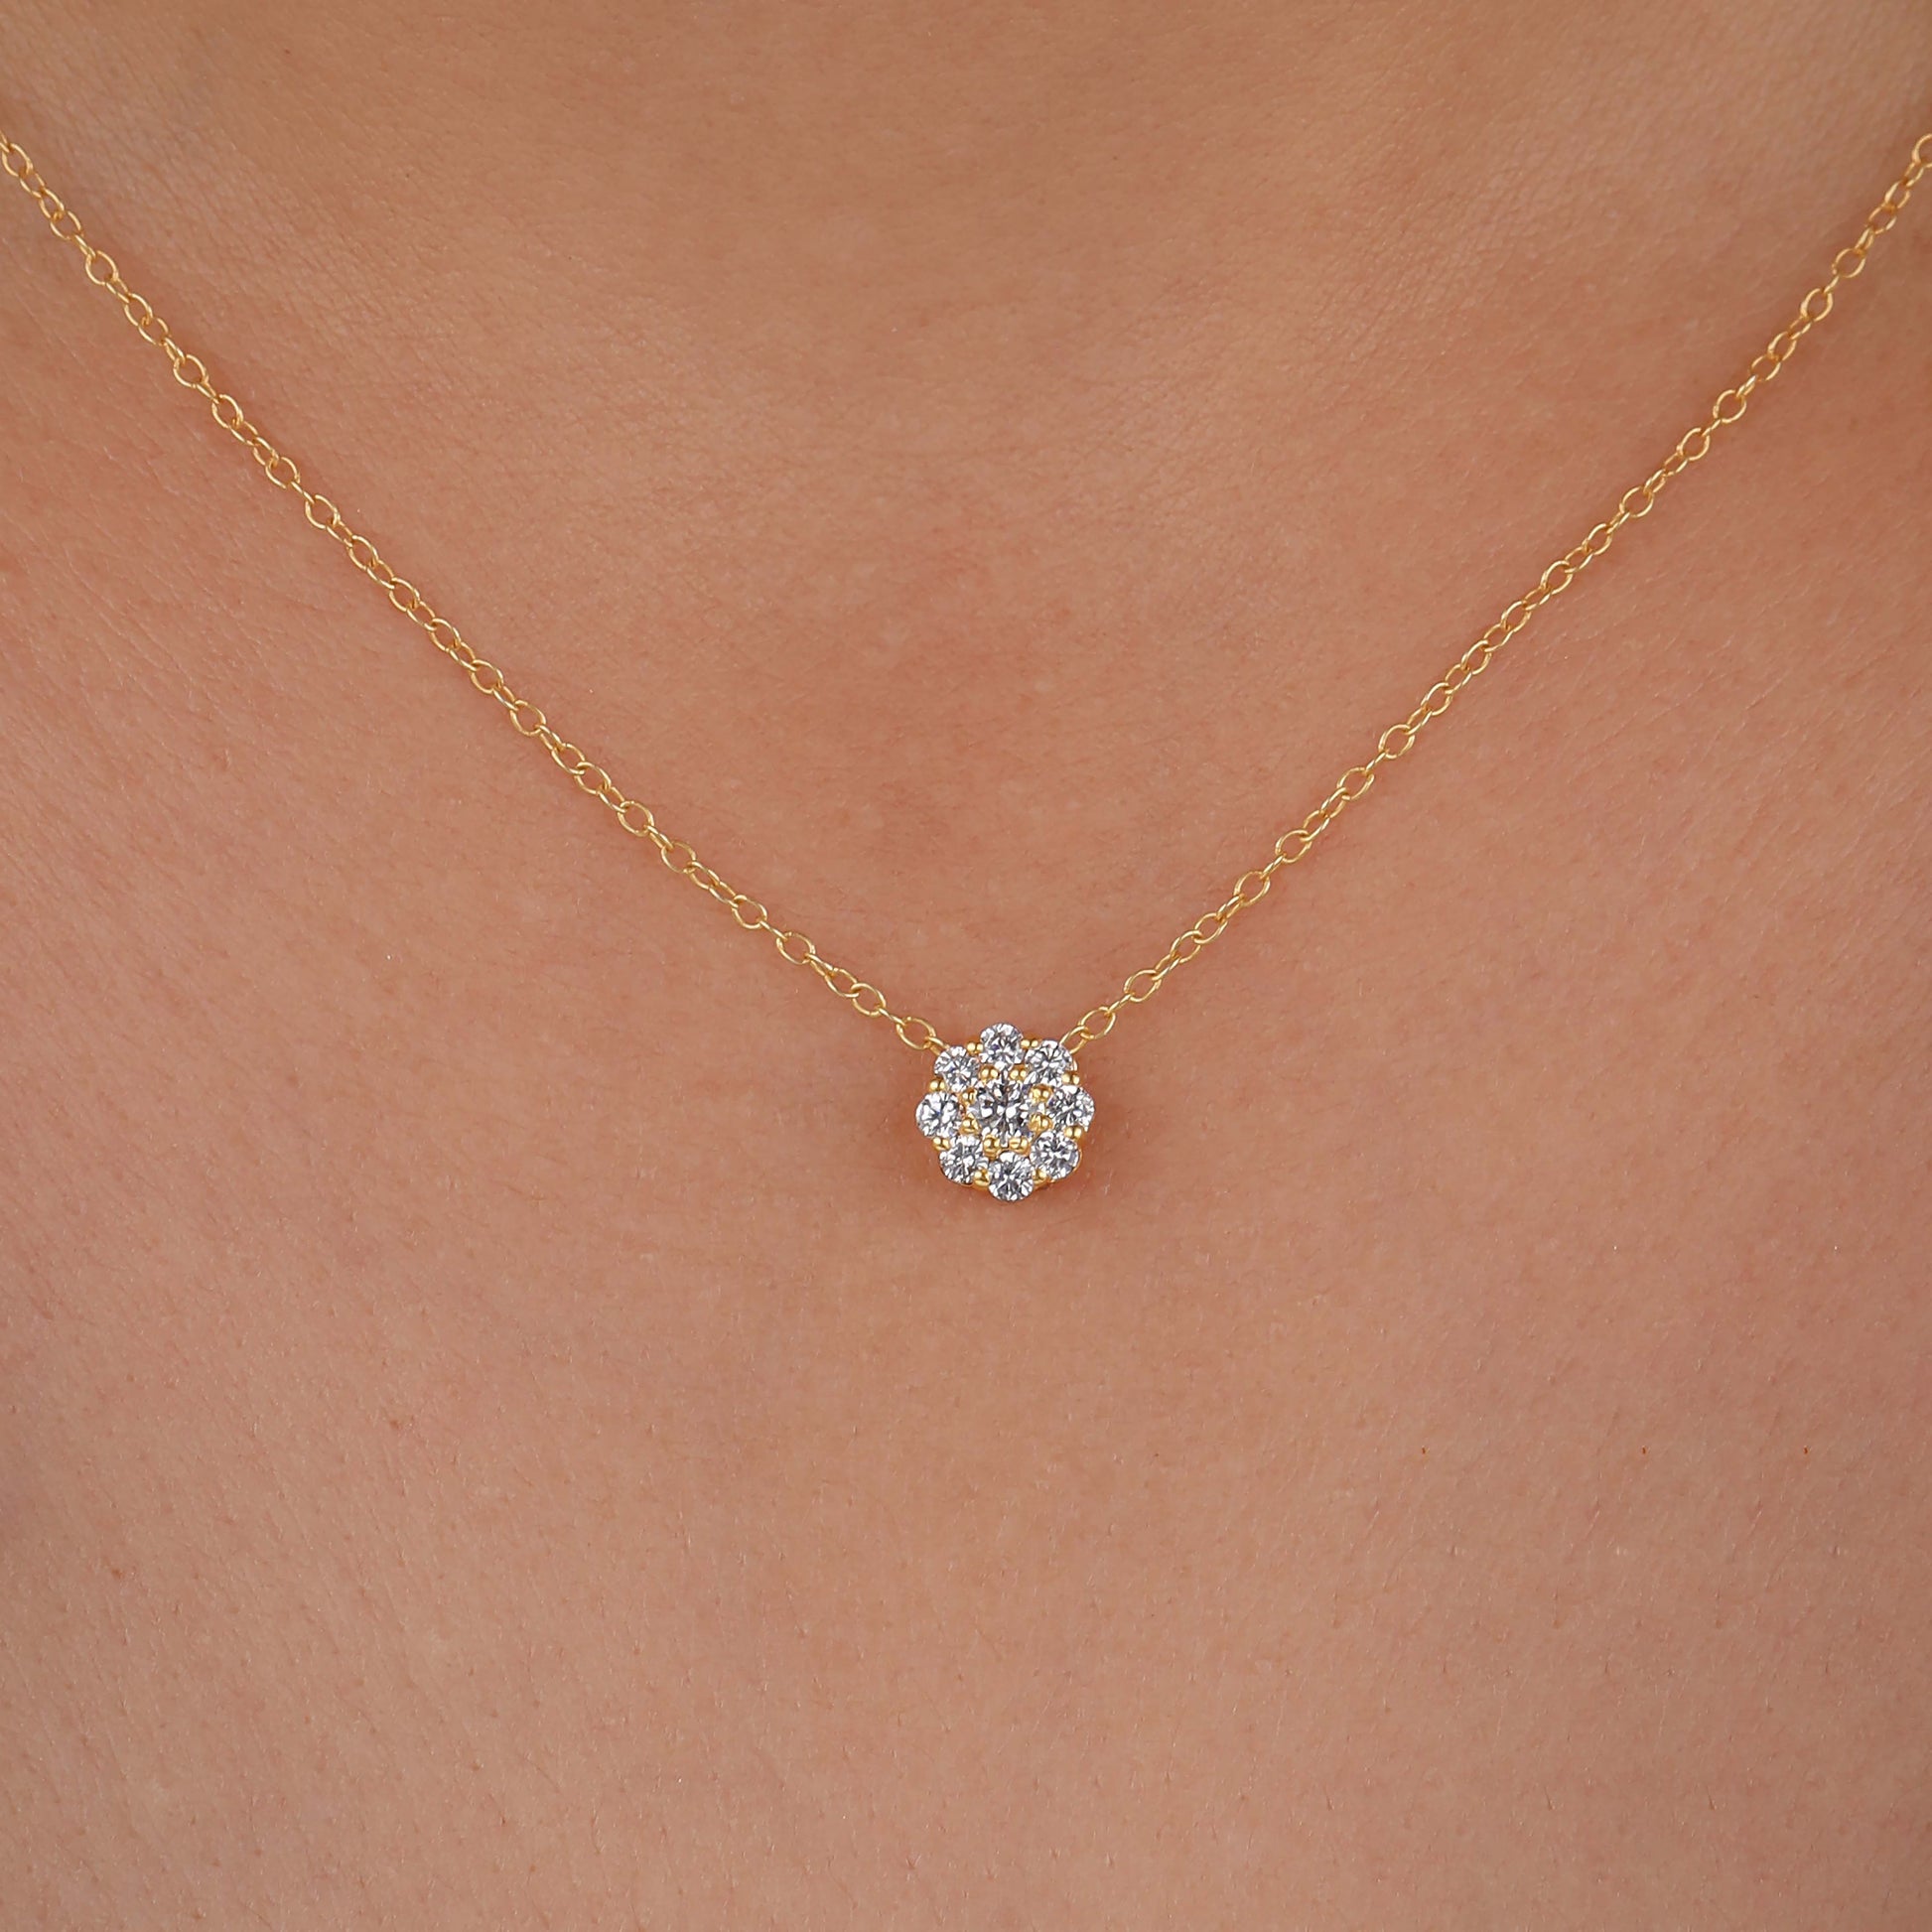 a necklace with a diamond flower